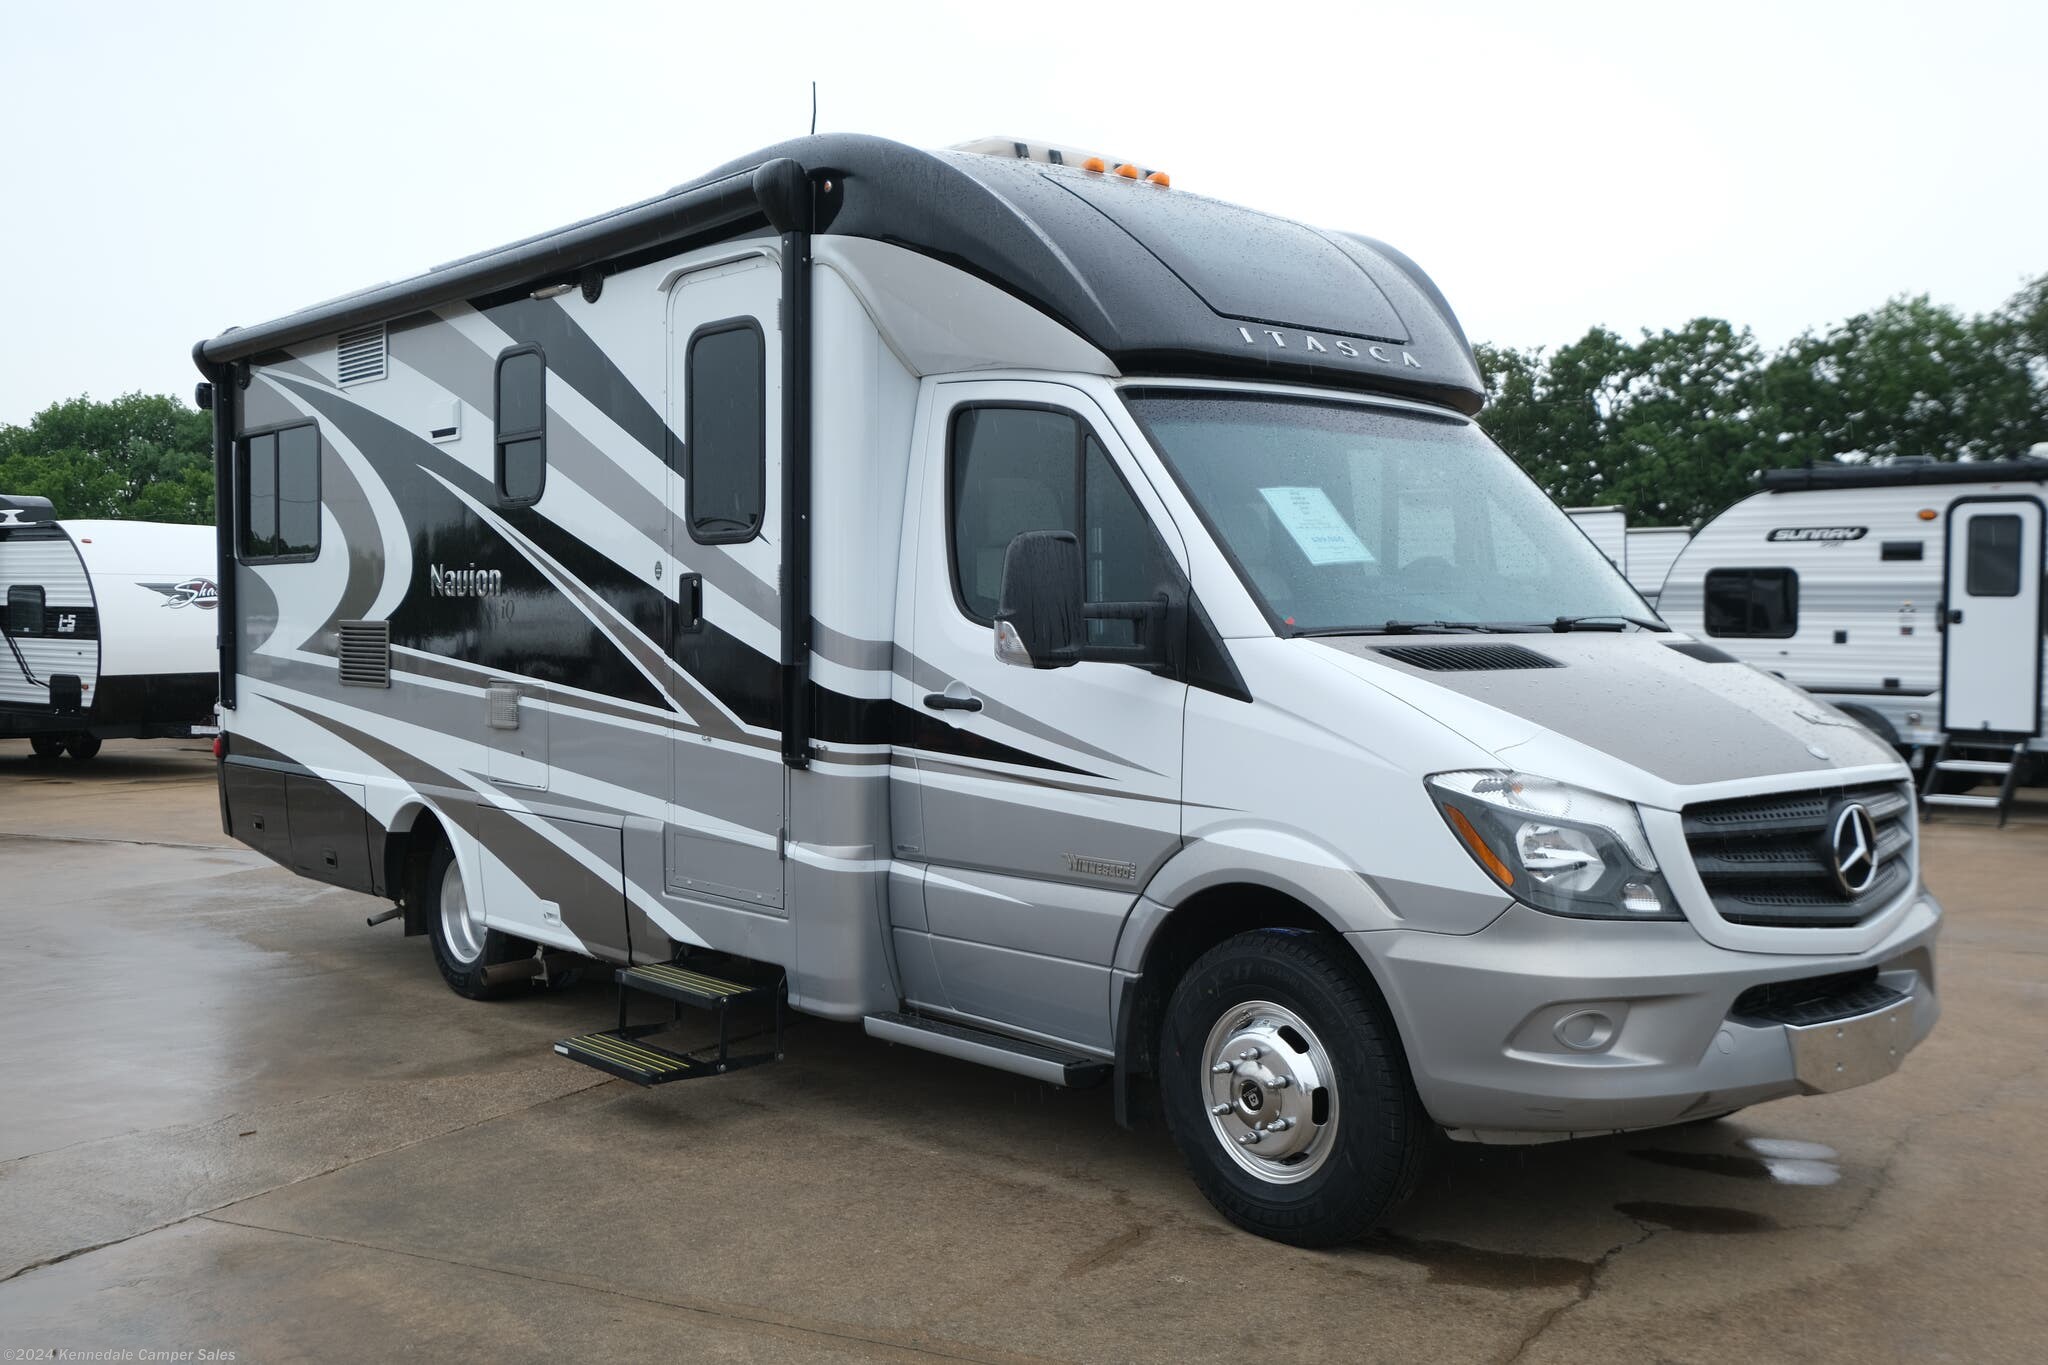 2015 Itasca Navion Iq 24g Rv For Sale In Kennedale Tx 76060 584191